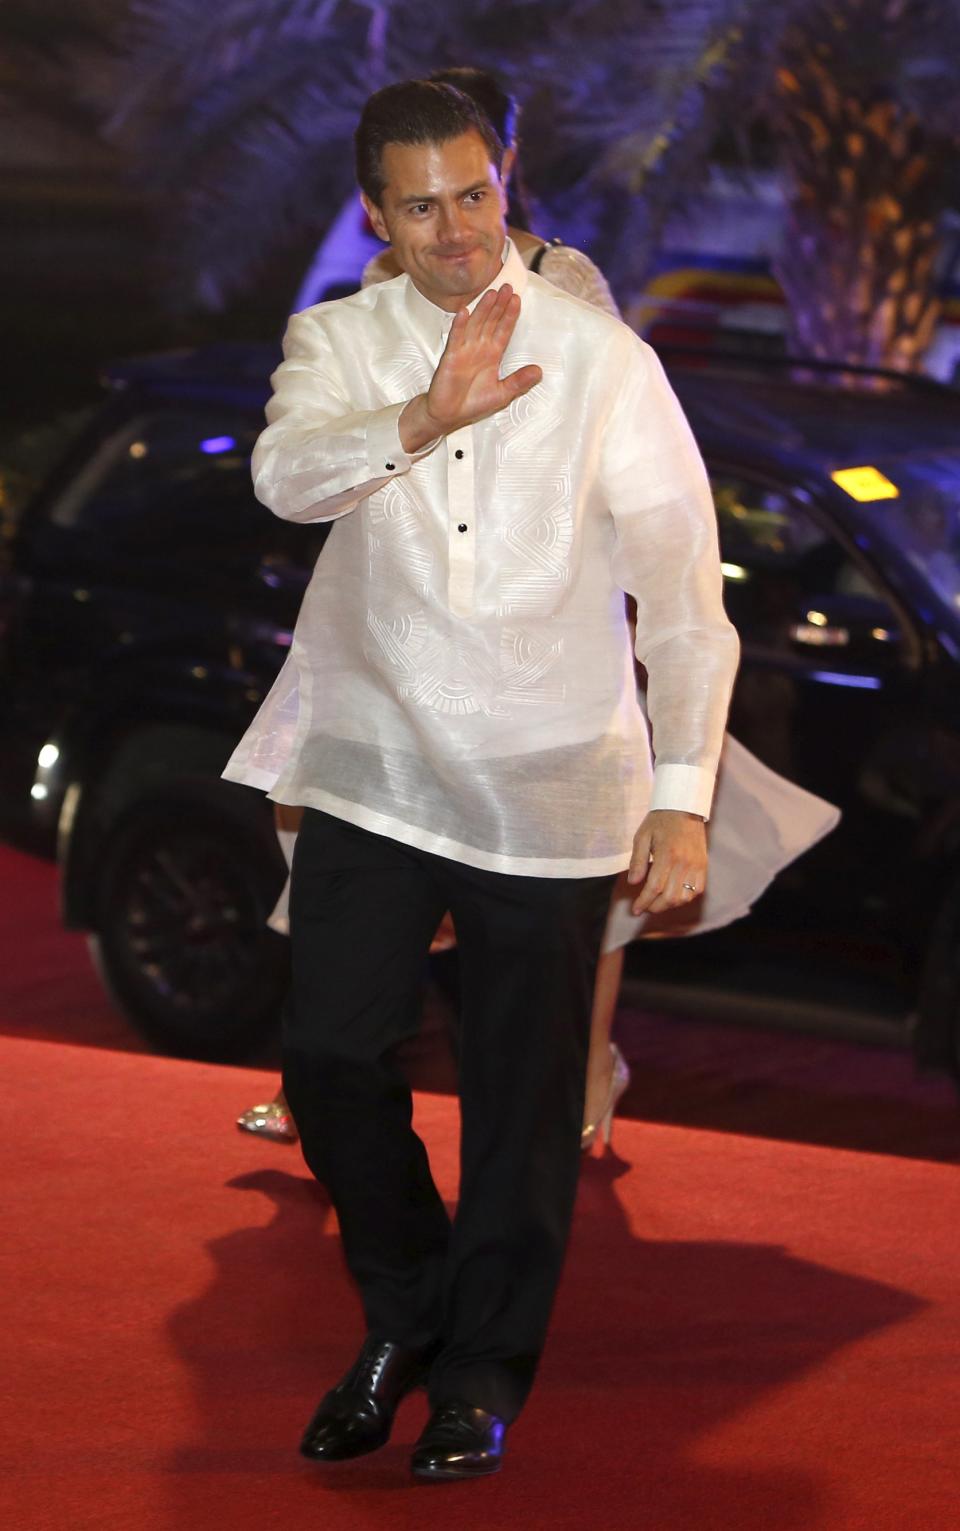 Mexico's President Enrique Pena Nieto arrives in a traditional barong for a welcome dinner during the Asia-Pacific Economic Cooperation (APEC) summit in the capital city of Manila